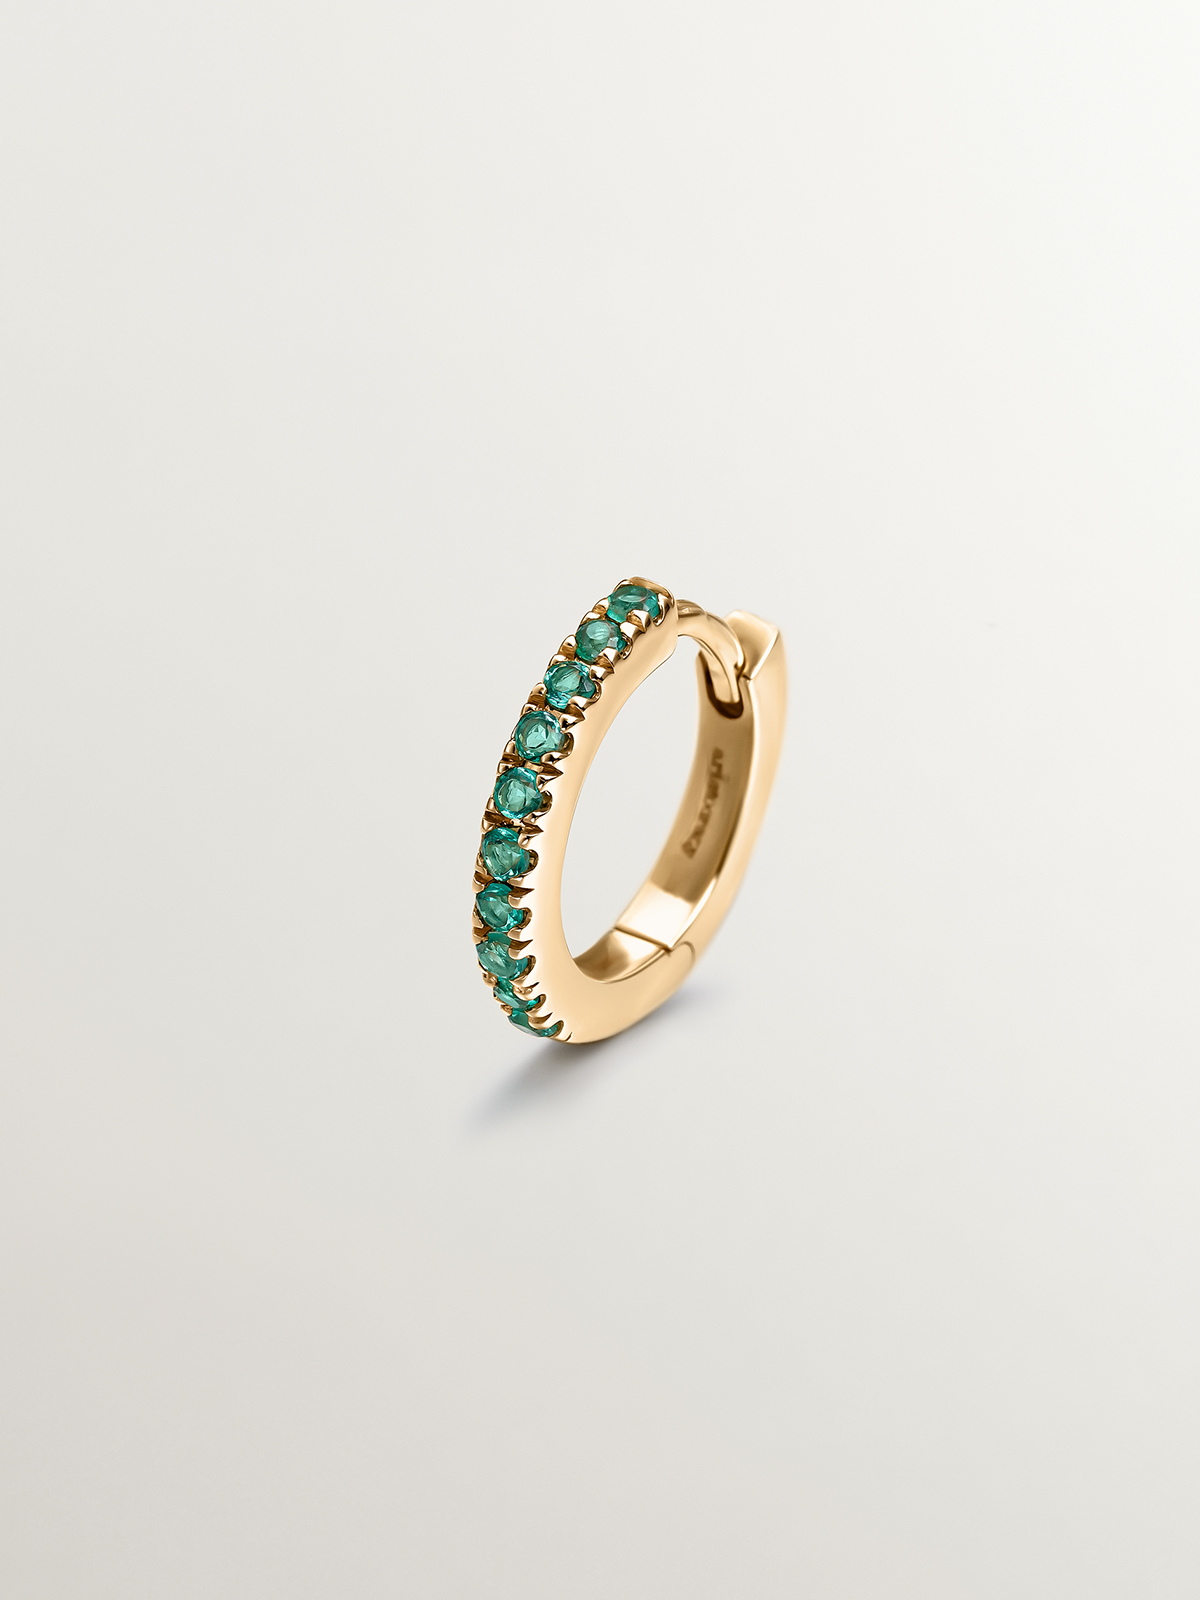 Small individual 9k yellow gold hoop earring with emeralds.